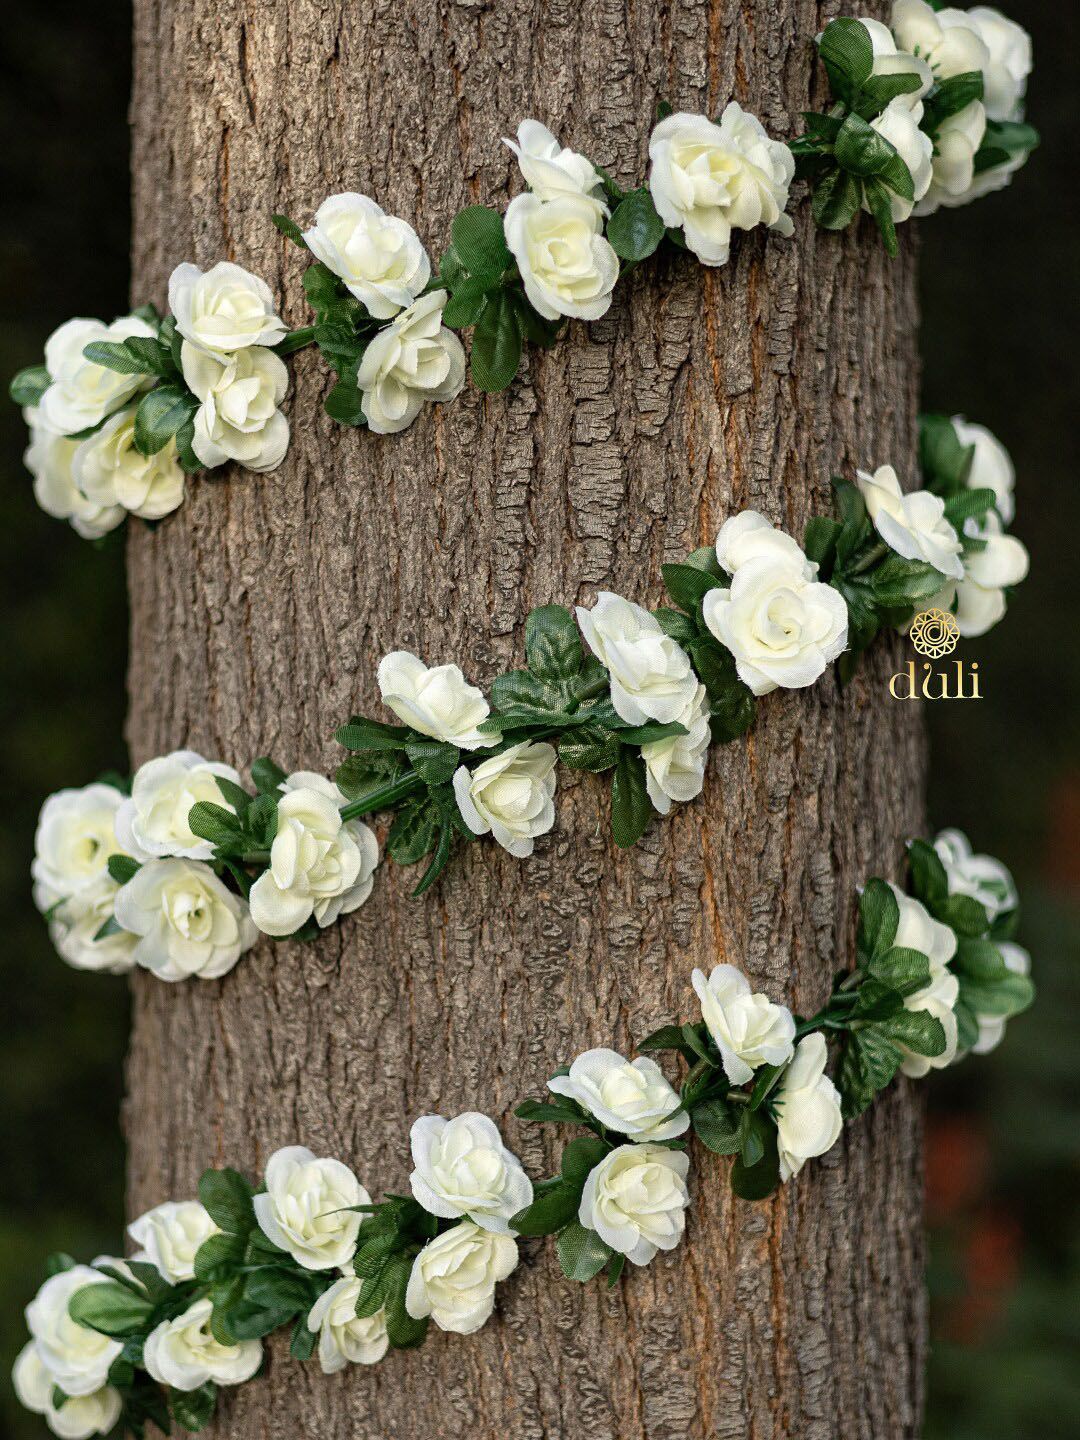 DULI White & Green Rose Creeper Artificial Flowers and Plants Price in India